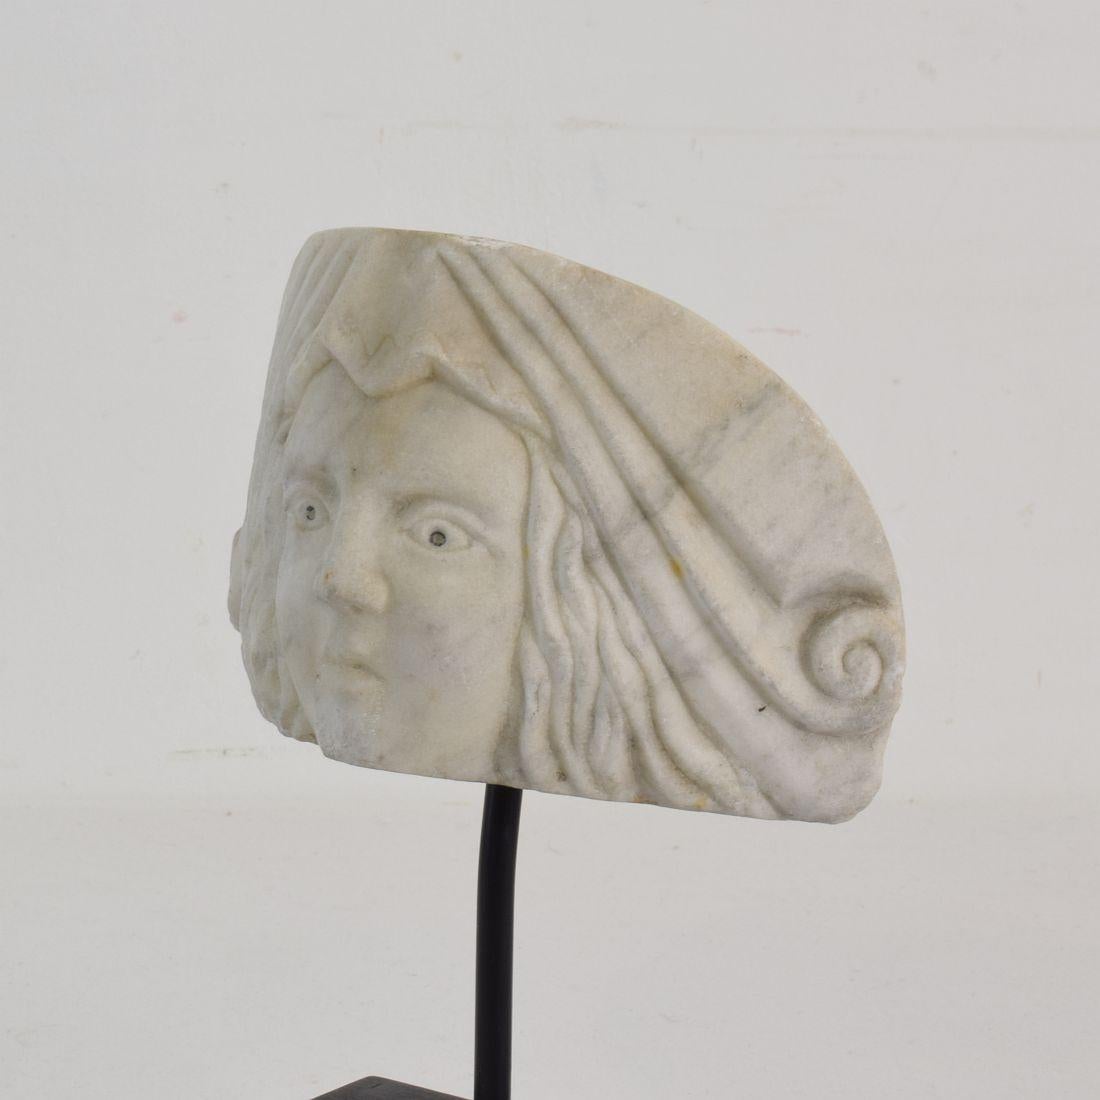 Early 19th Century Neoclassical Italian Marble Architectural Head Fragment 4